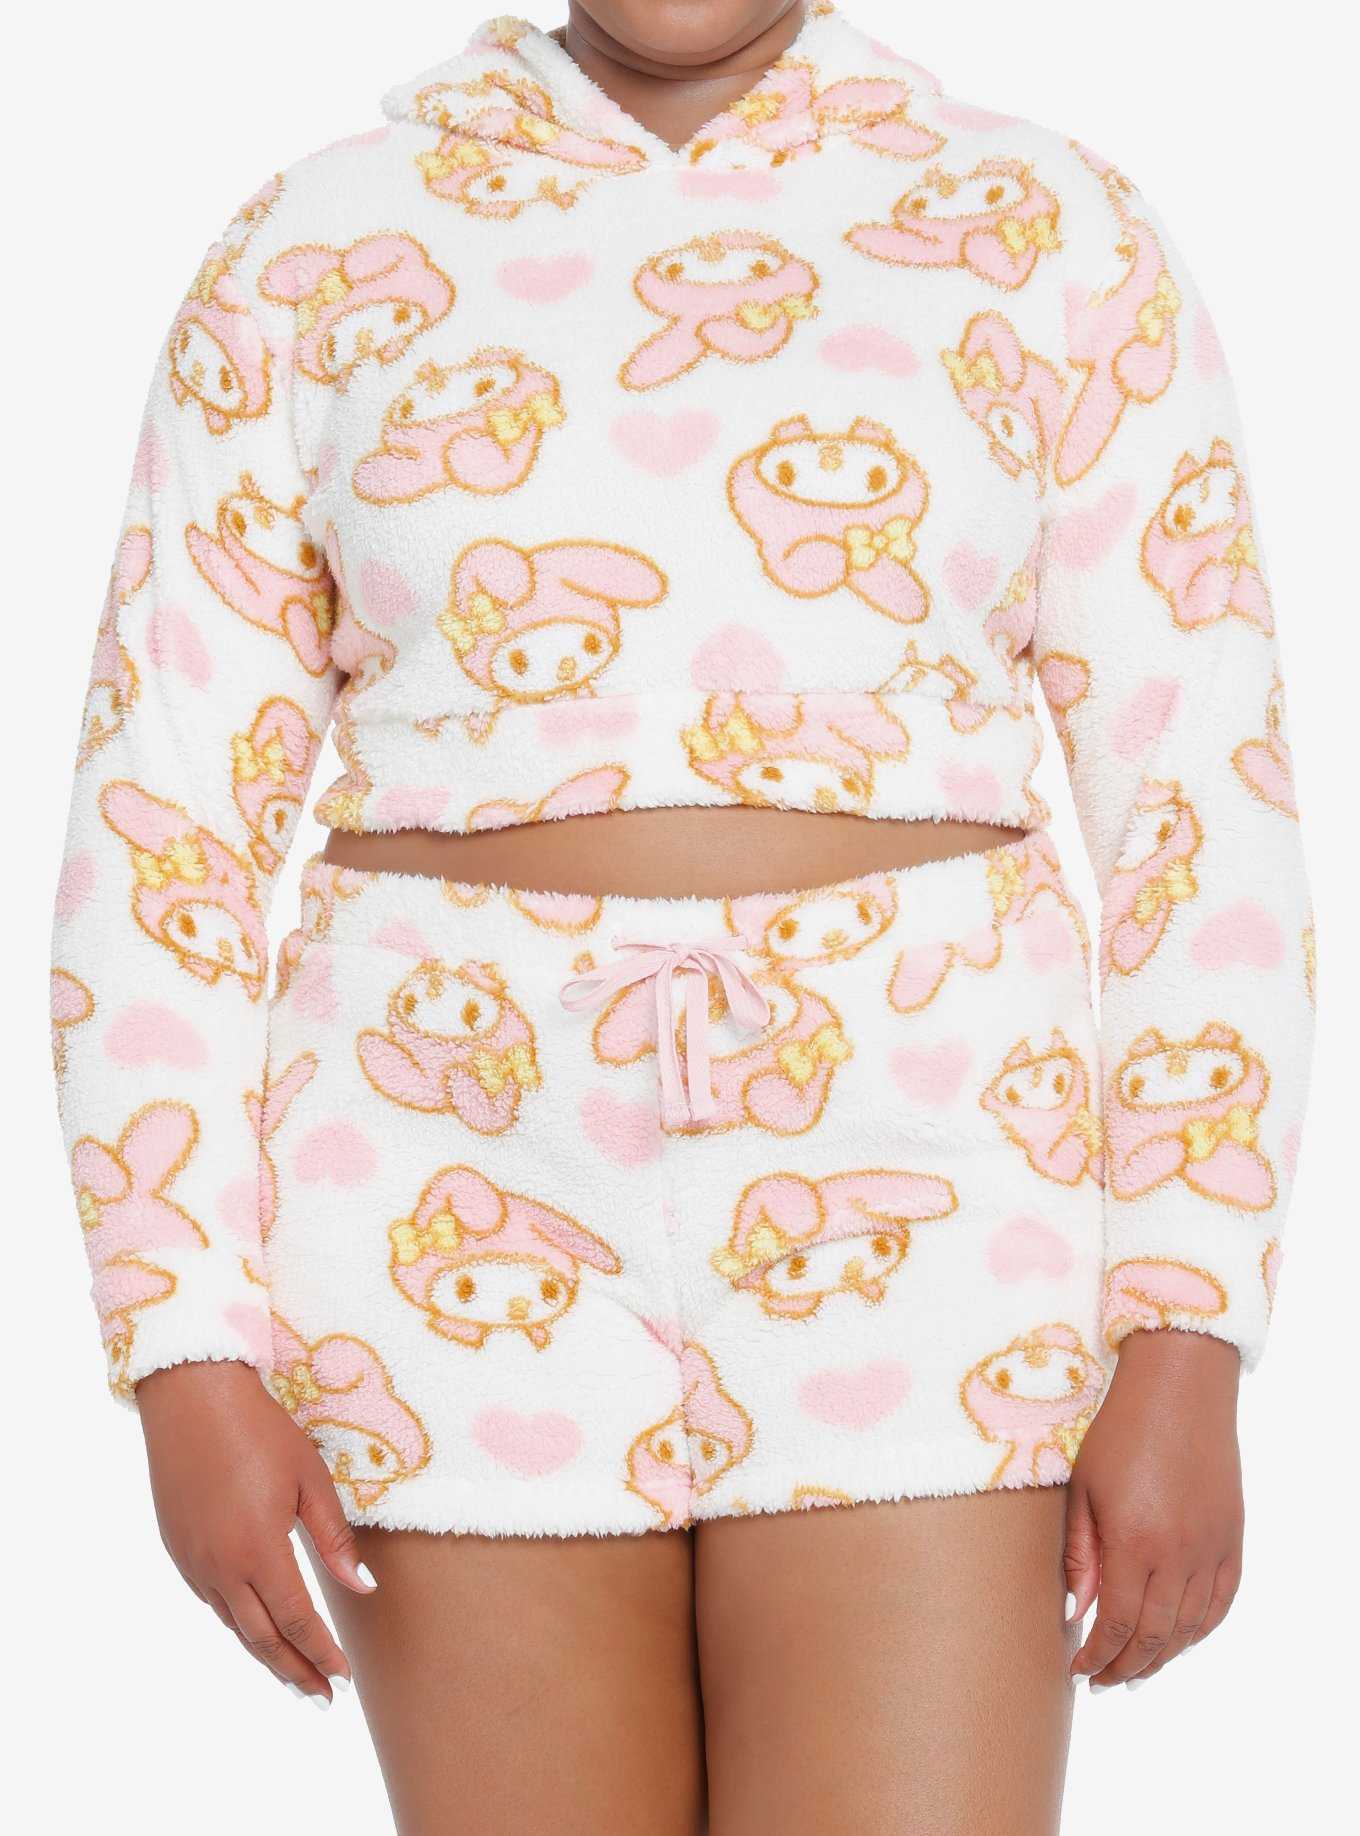 My Melody Allover Print Sherpa Girls Lounge Set Plus Size, , hi-res